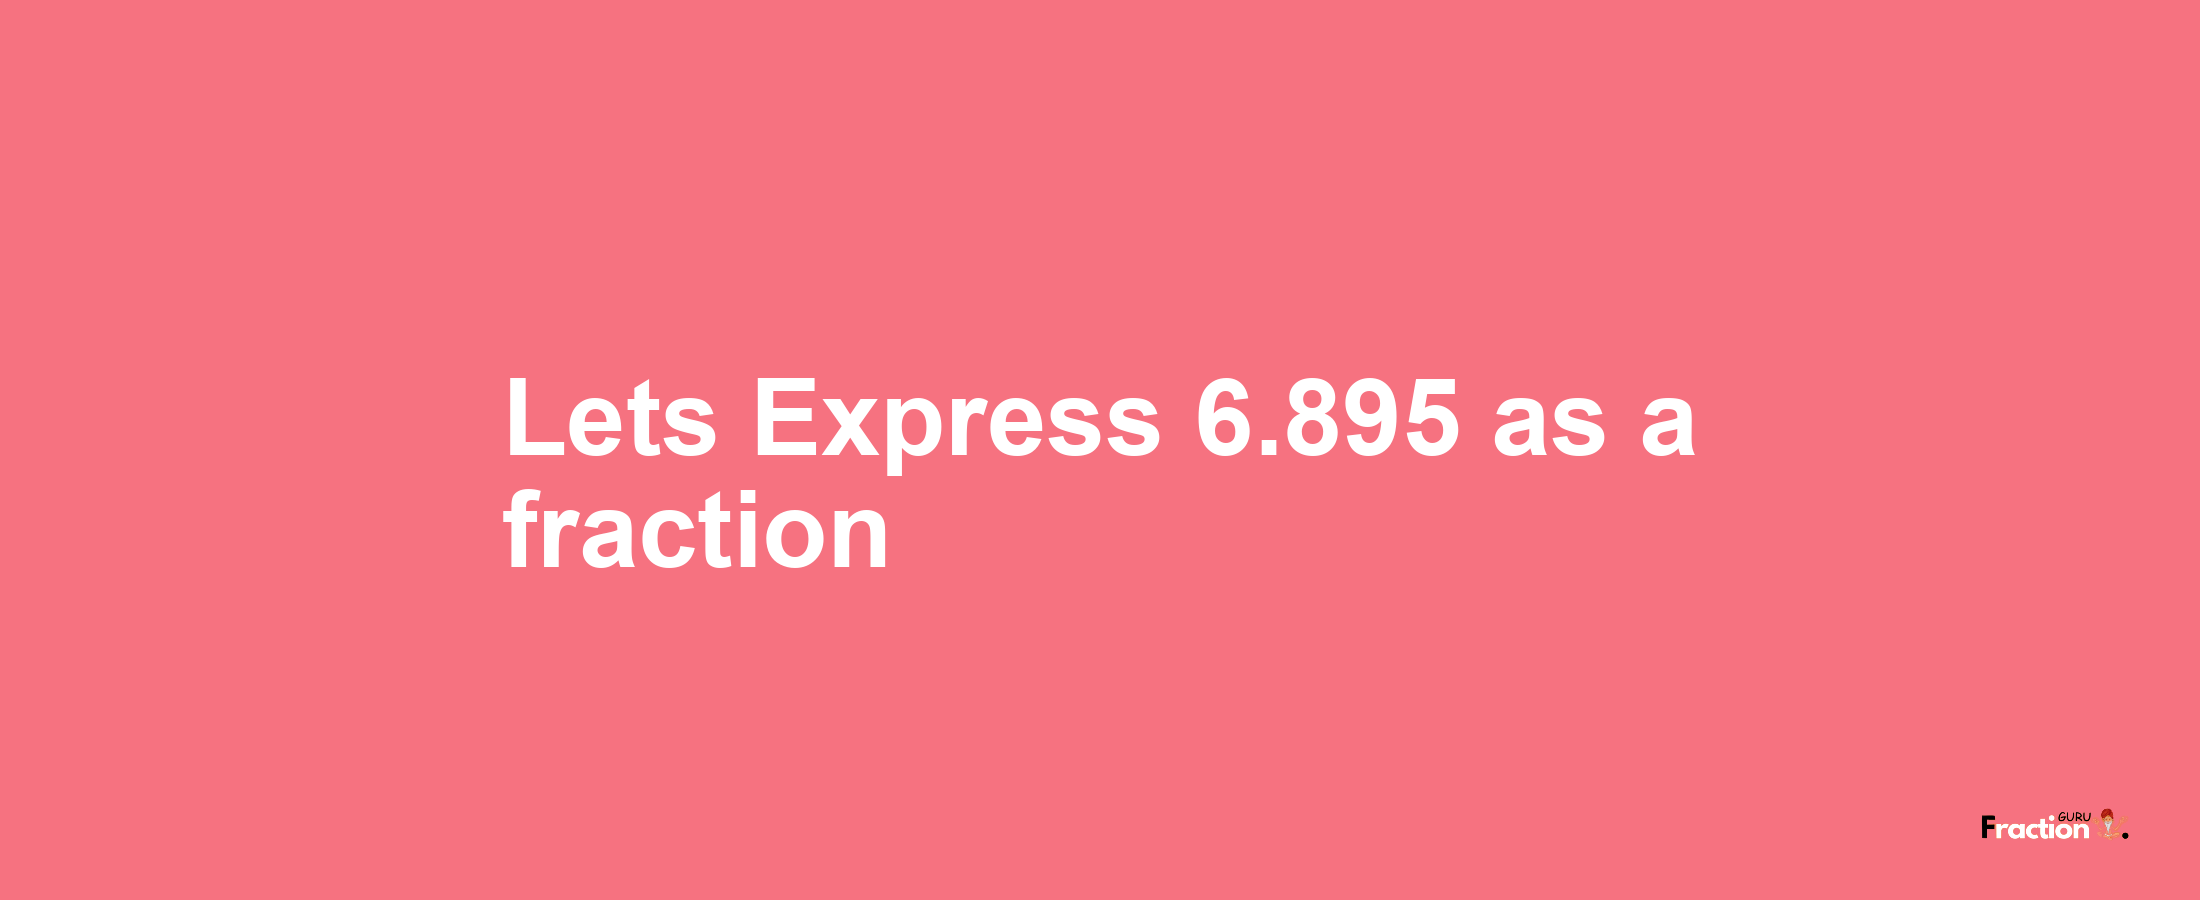 Lets Express 6.895 as afraction